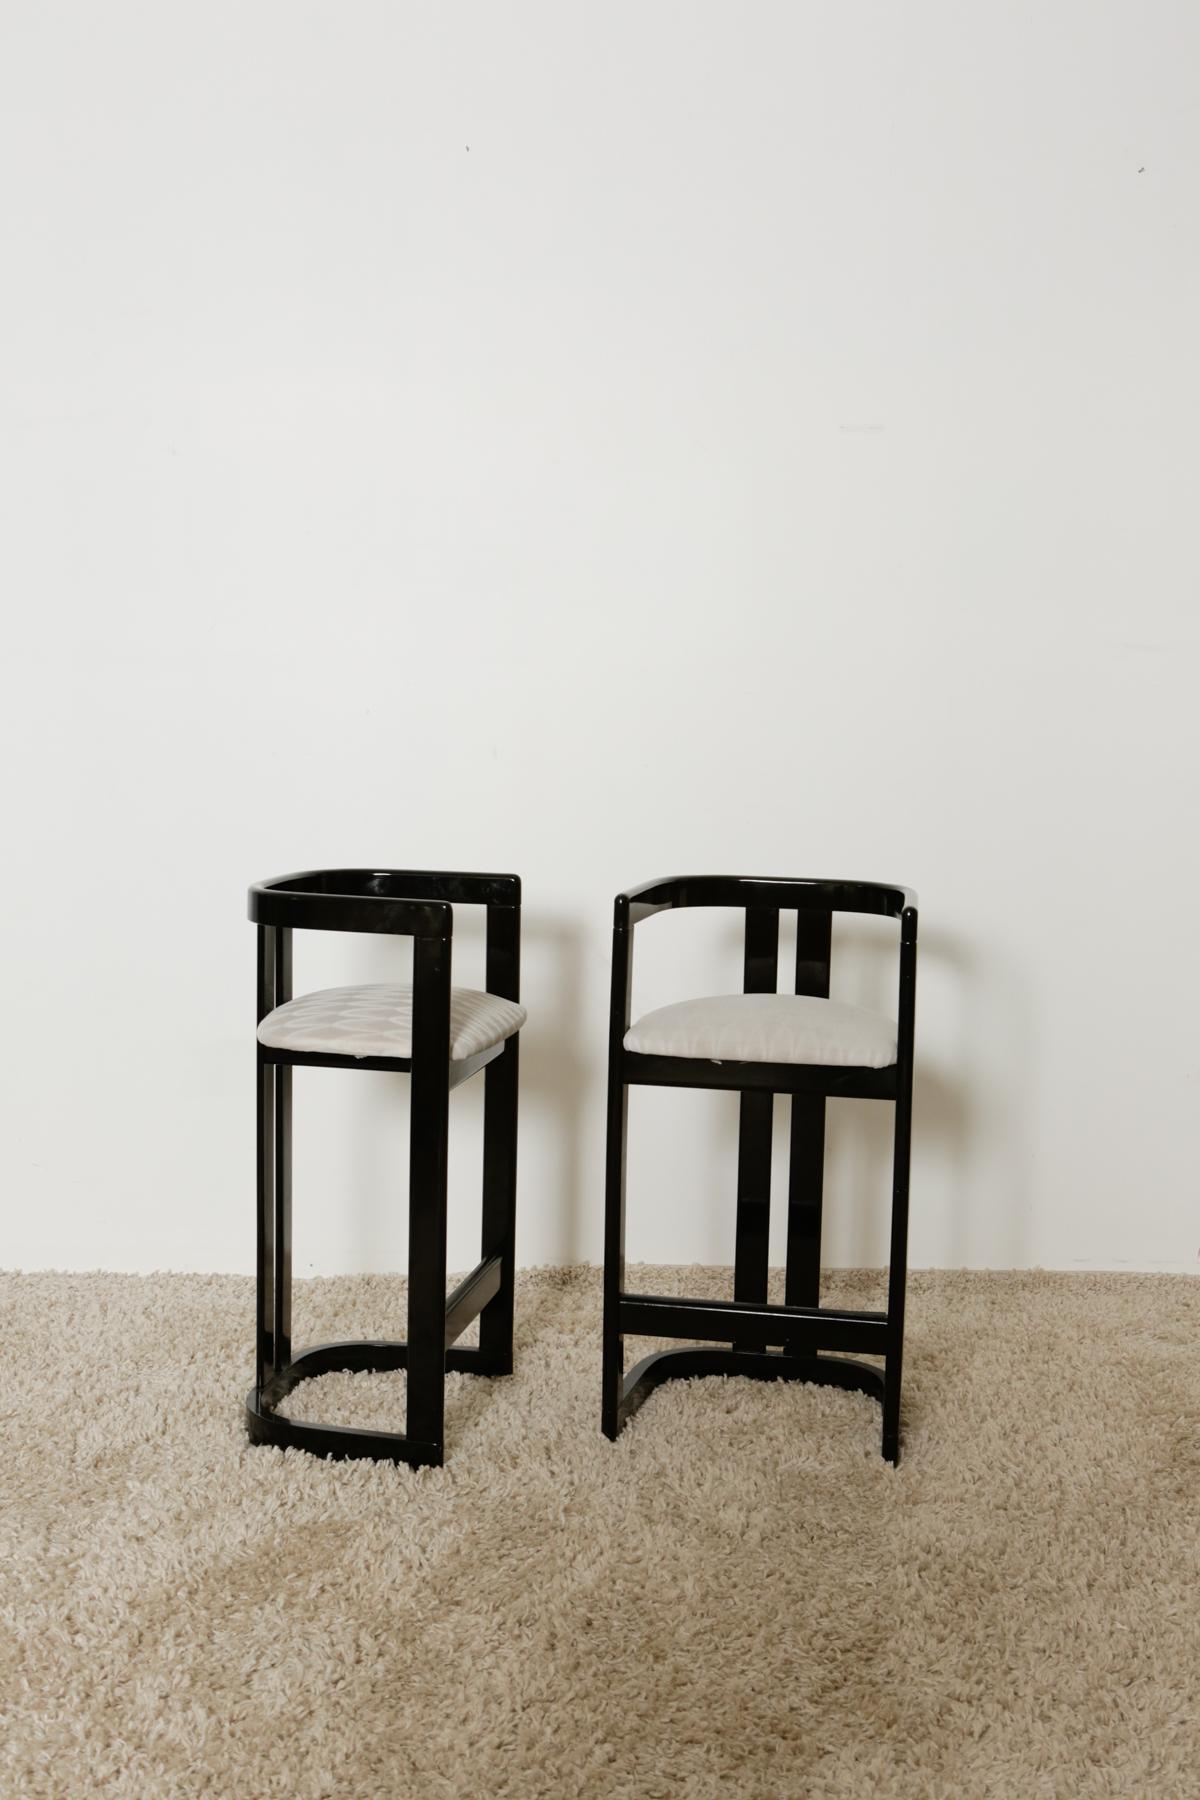 Karl Springer “Onassis” Style 1980s Black Lacquer Bar Stools as a Set 5